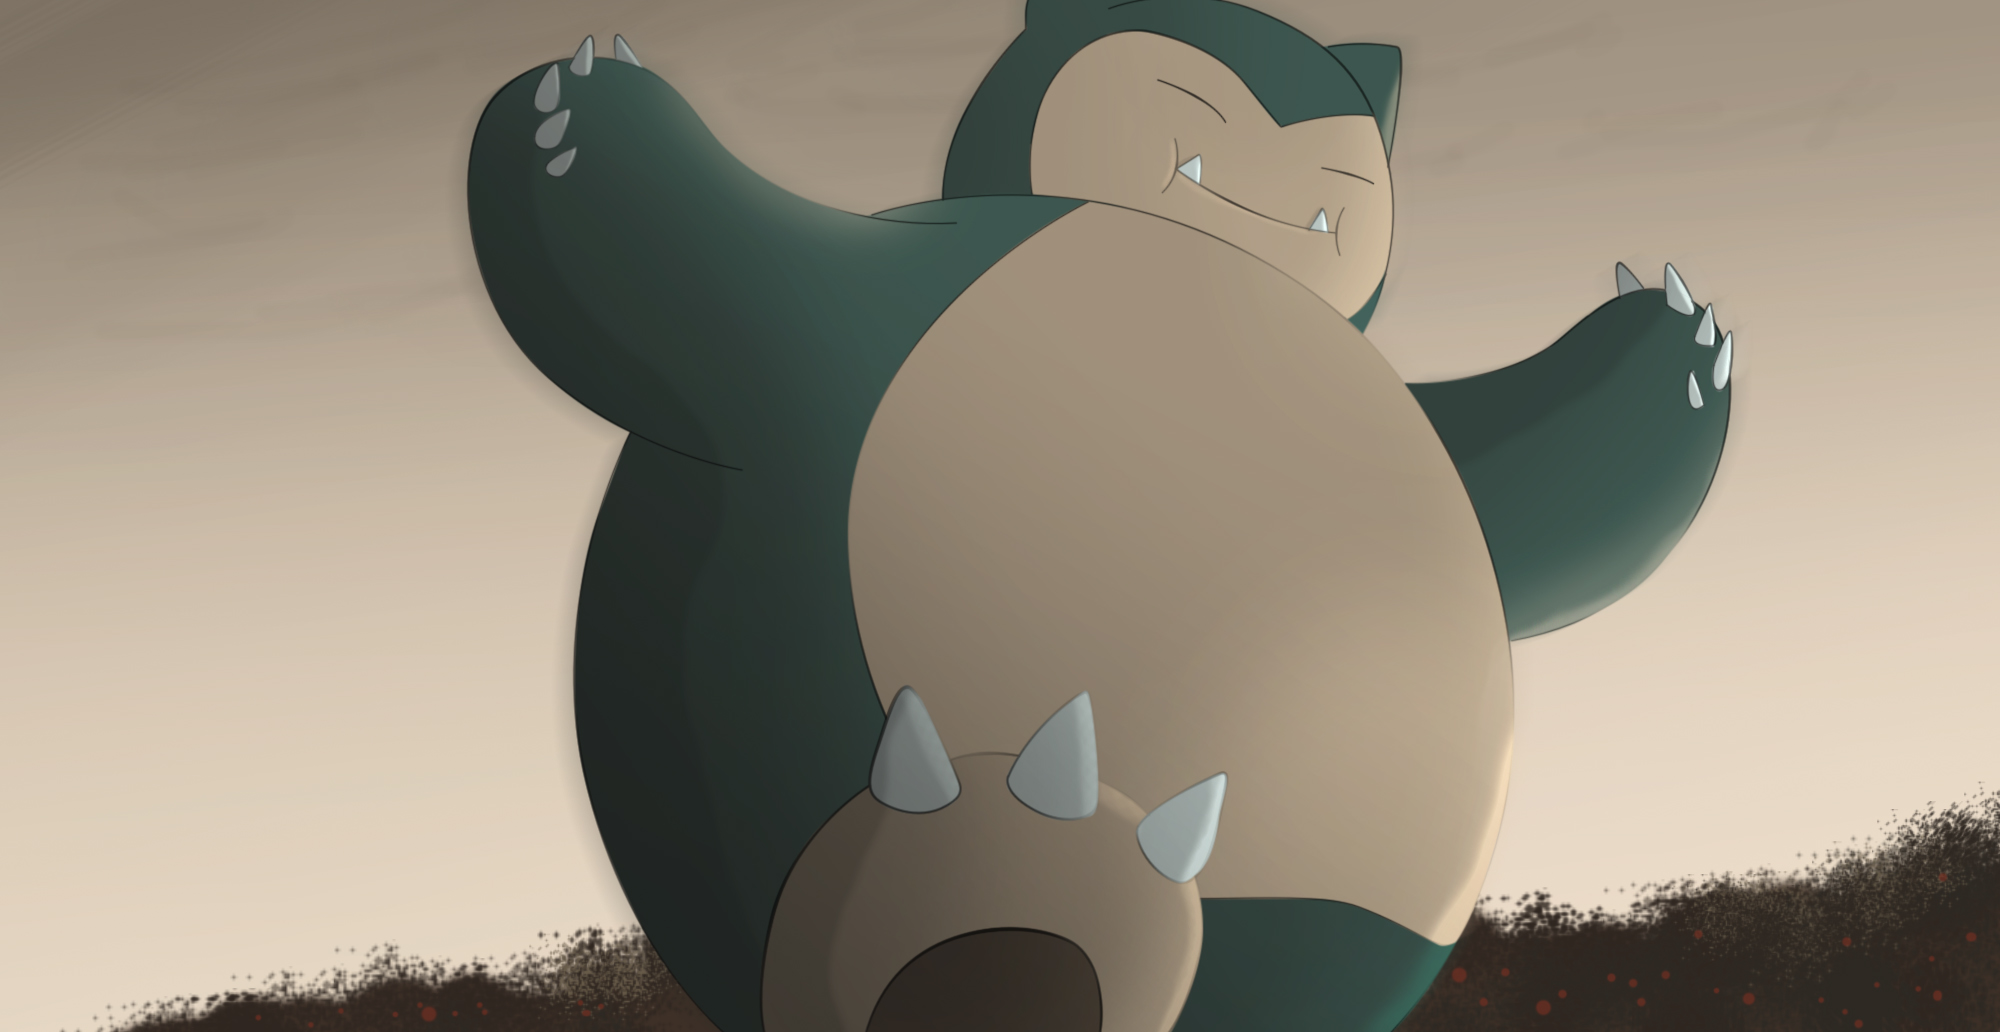 commission__snorlax_by_all0412_d88ifmr.jpg